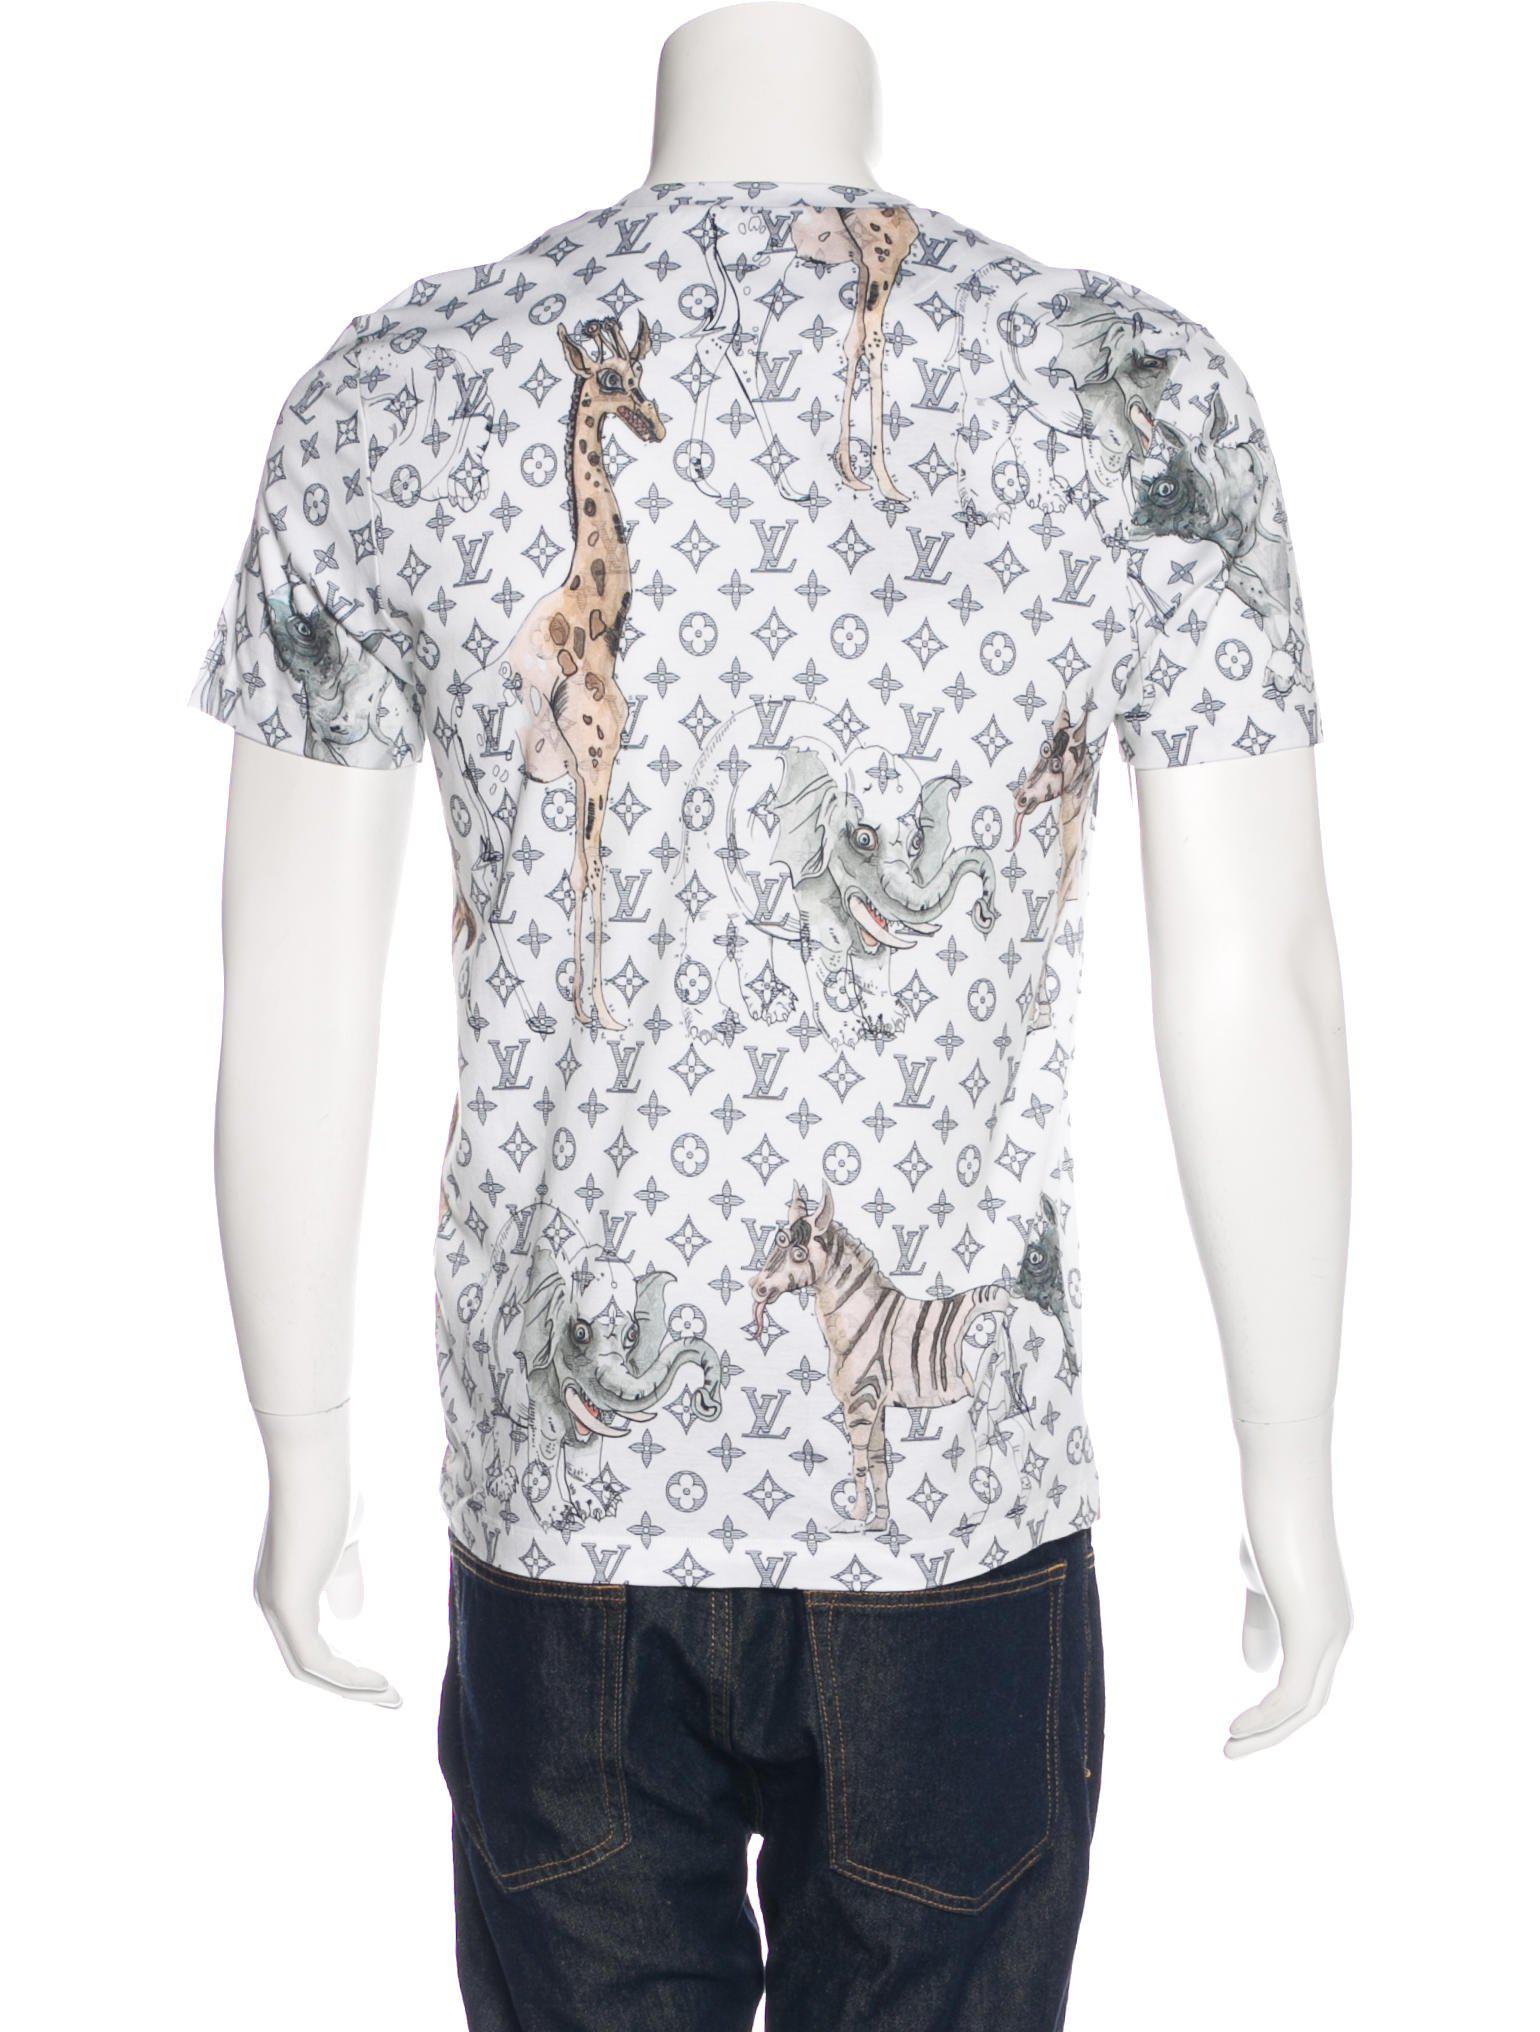 Lyst - Louis Vuitton 2017 Chapman Brothers Monogram T-shirt W/ Tags White in Natural for Men